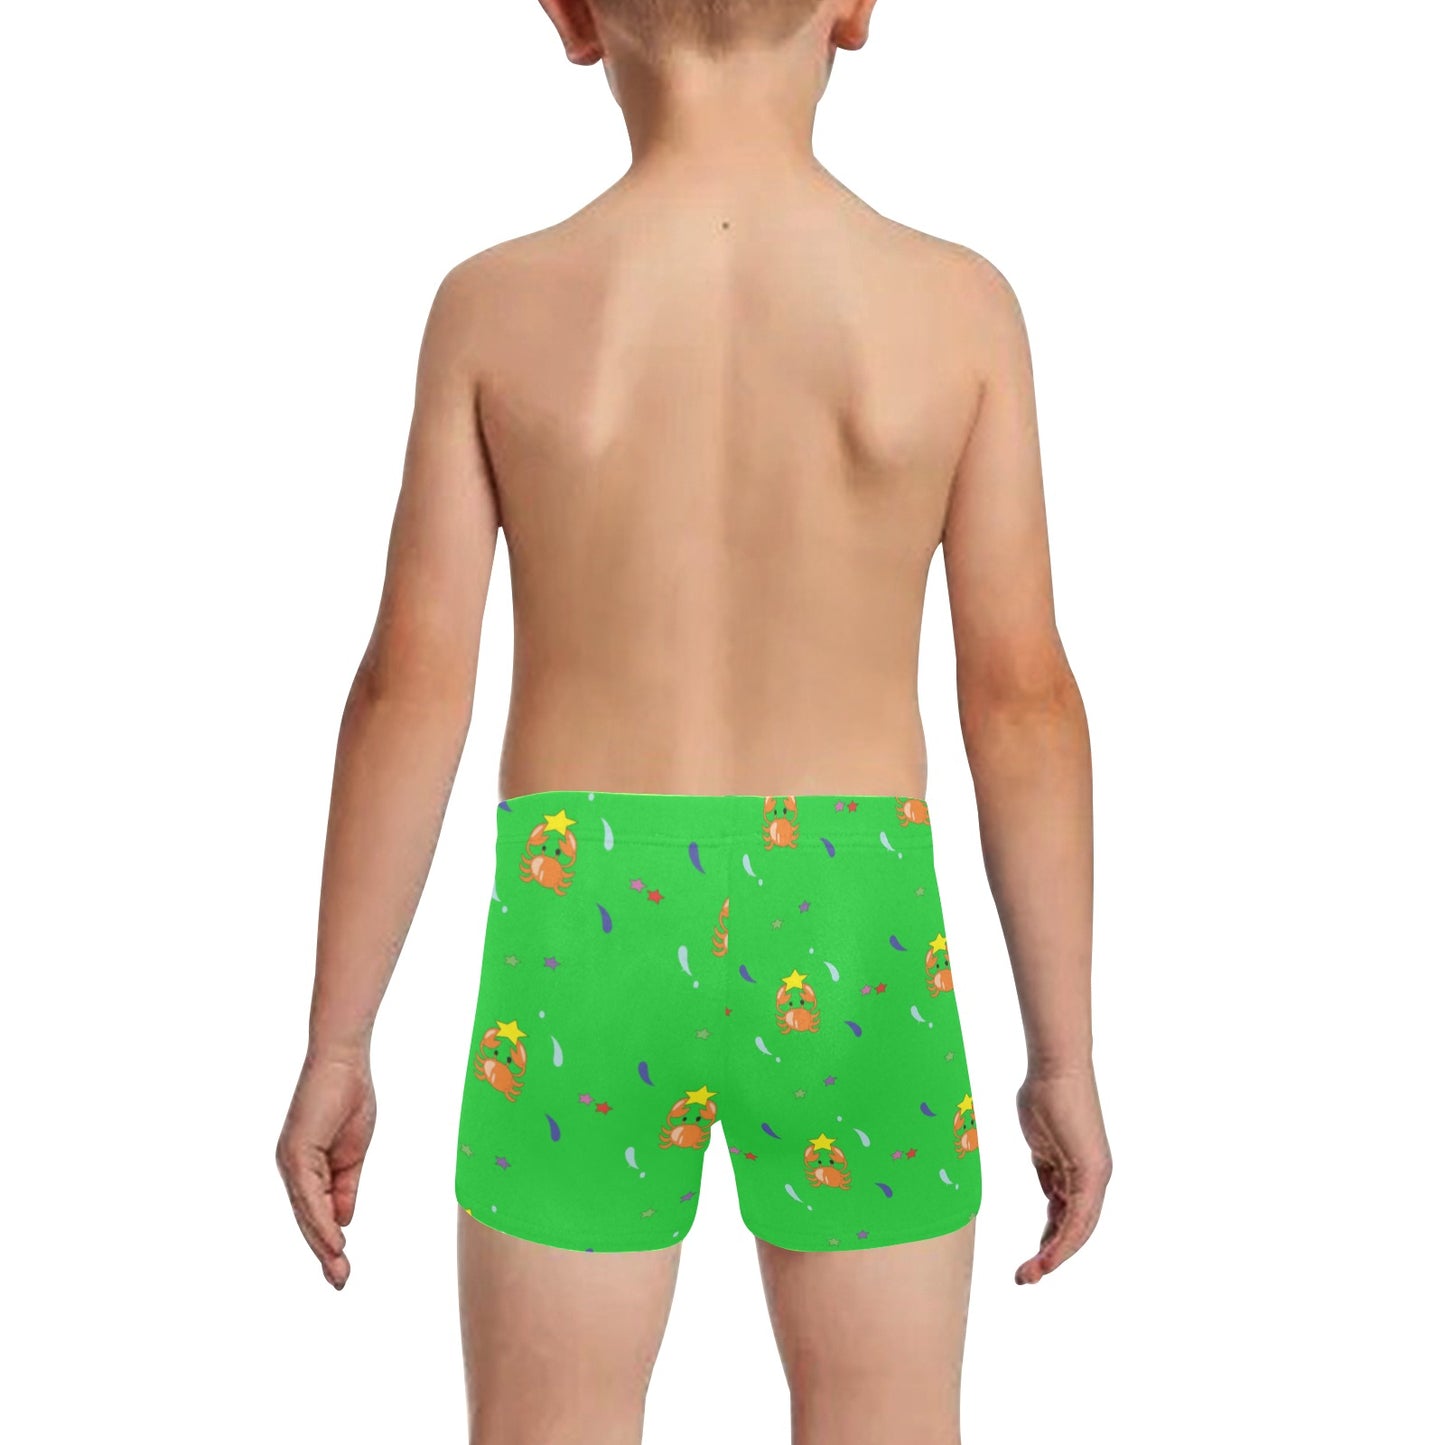 Boys' Swimming Trunks "Patterned stars and crabble"